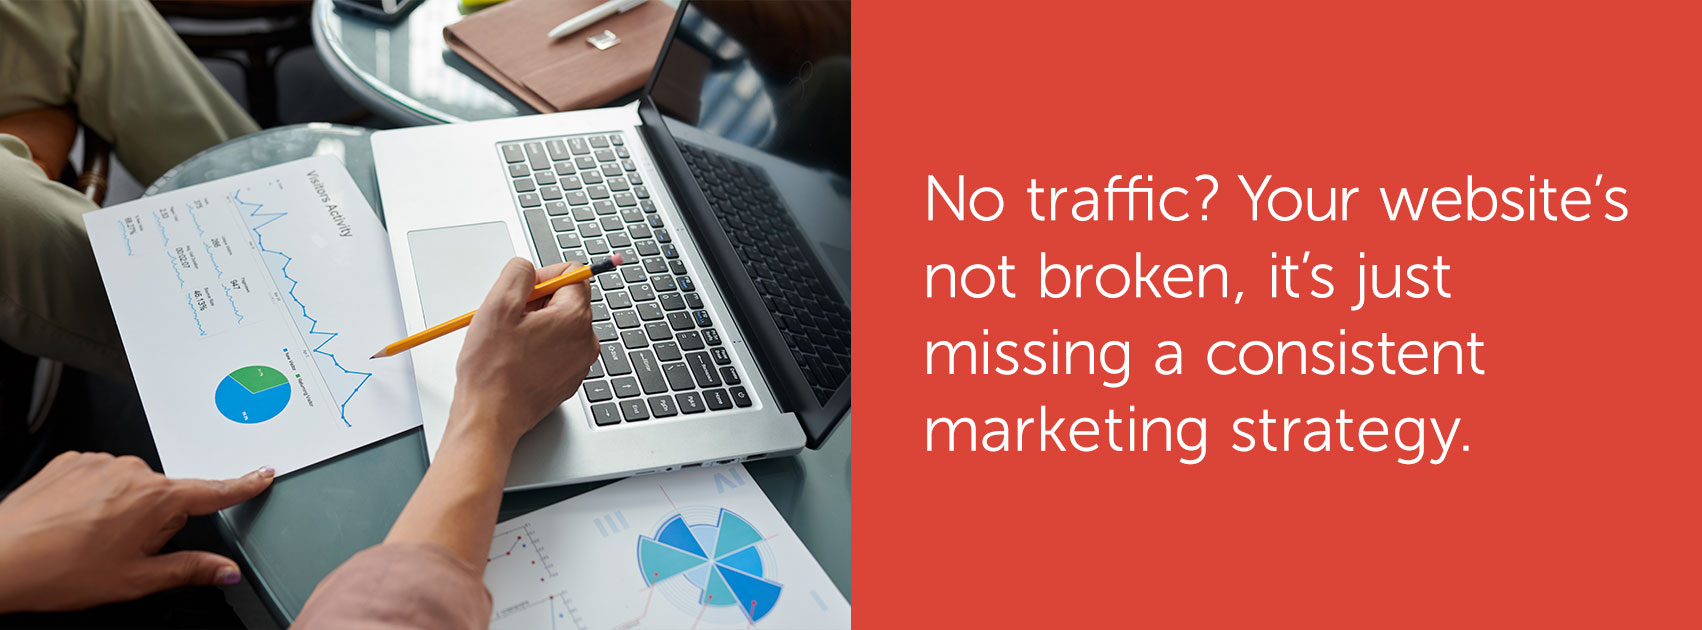 No Traffic? You're Website is missing a consistent marketing strategy